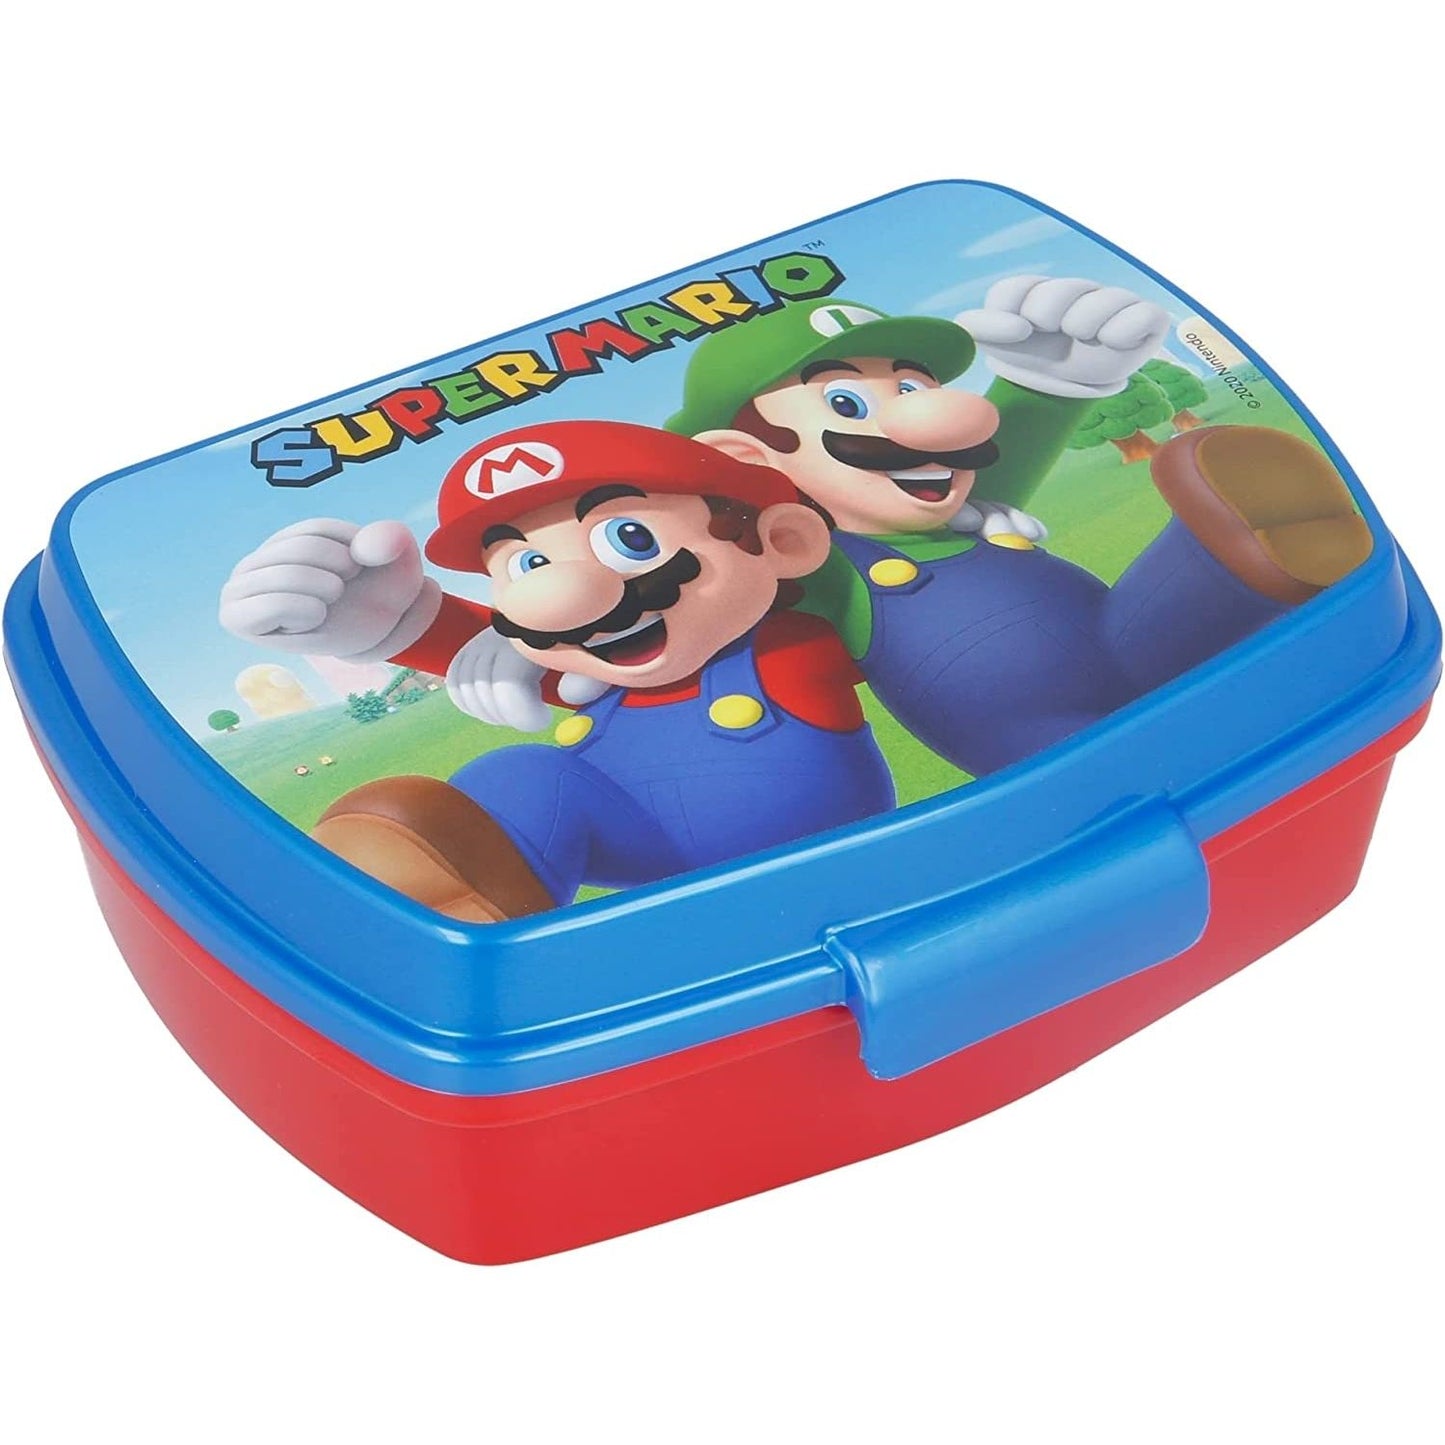 Lunchbox/Lunch Box/Picnic/School Food Carrier - SUPER MARIO